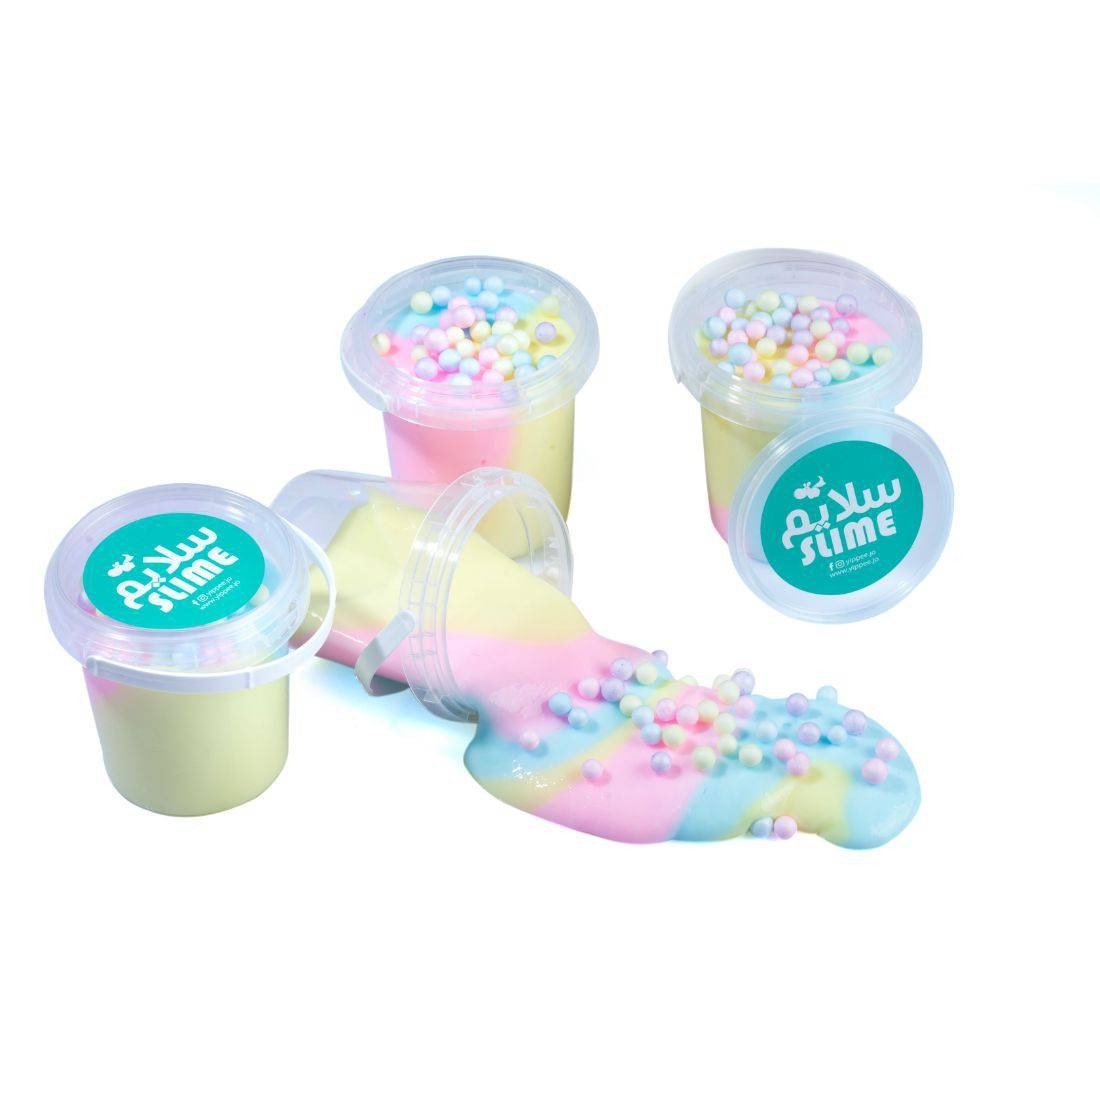 Yippee - Pastel Trio Slime